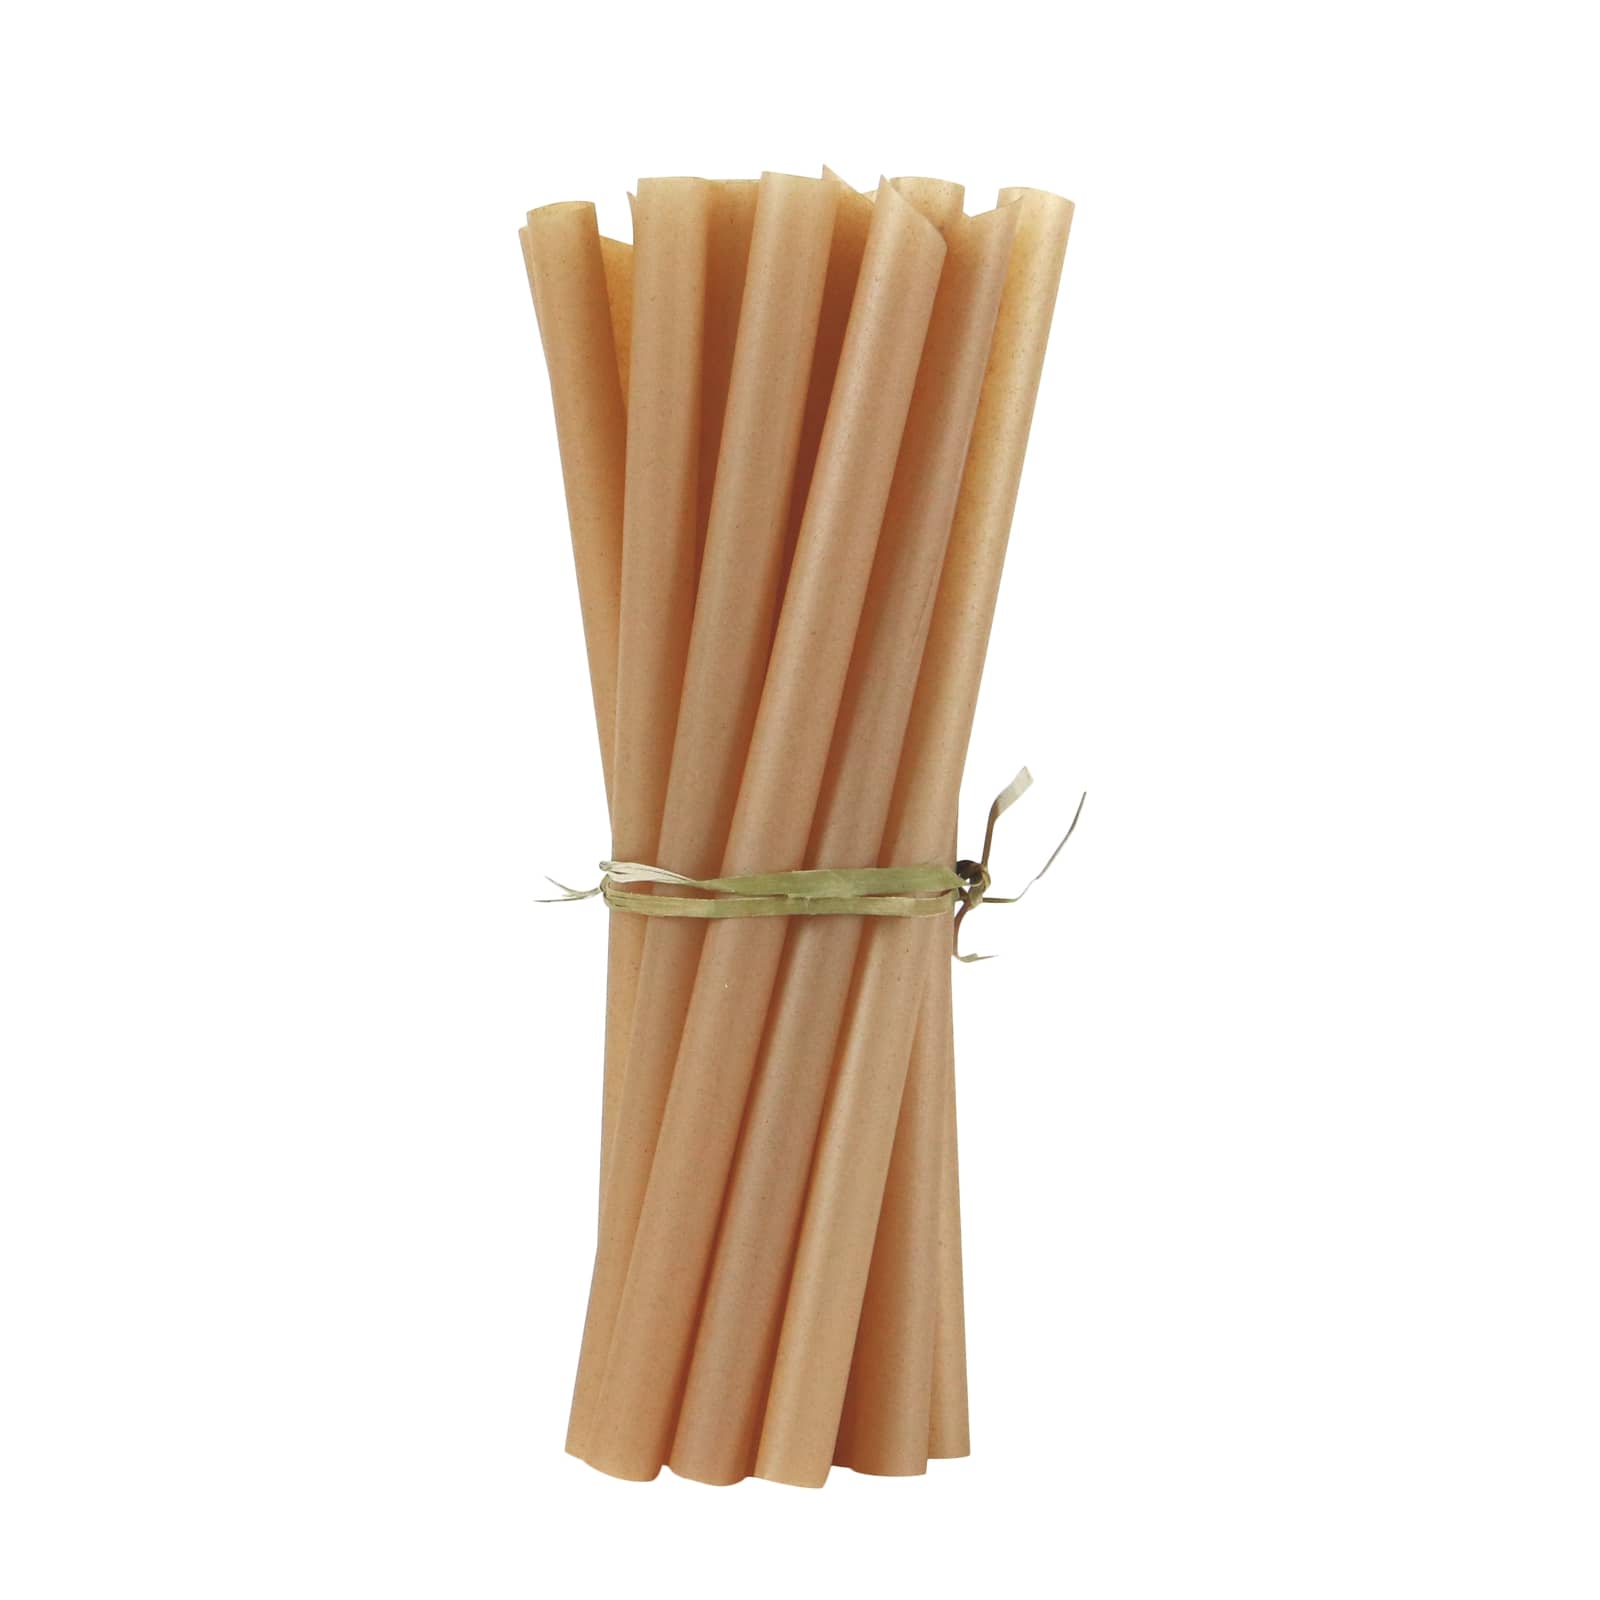 Equo Sugarcane Straws | Purchase at The Green Collective